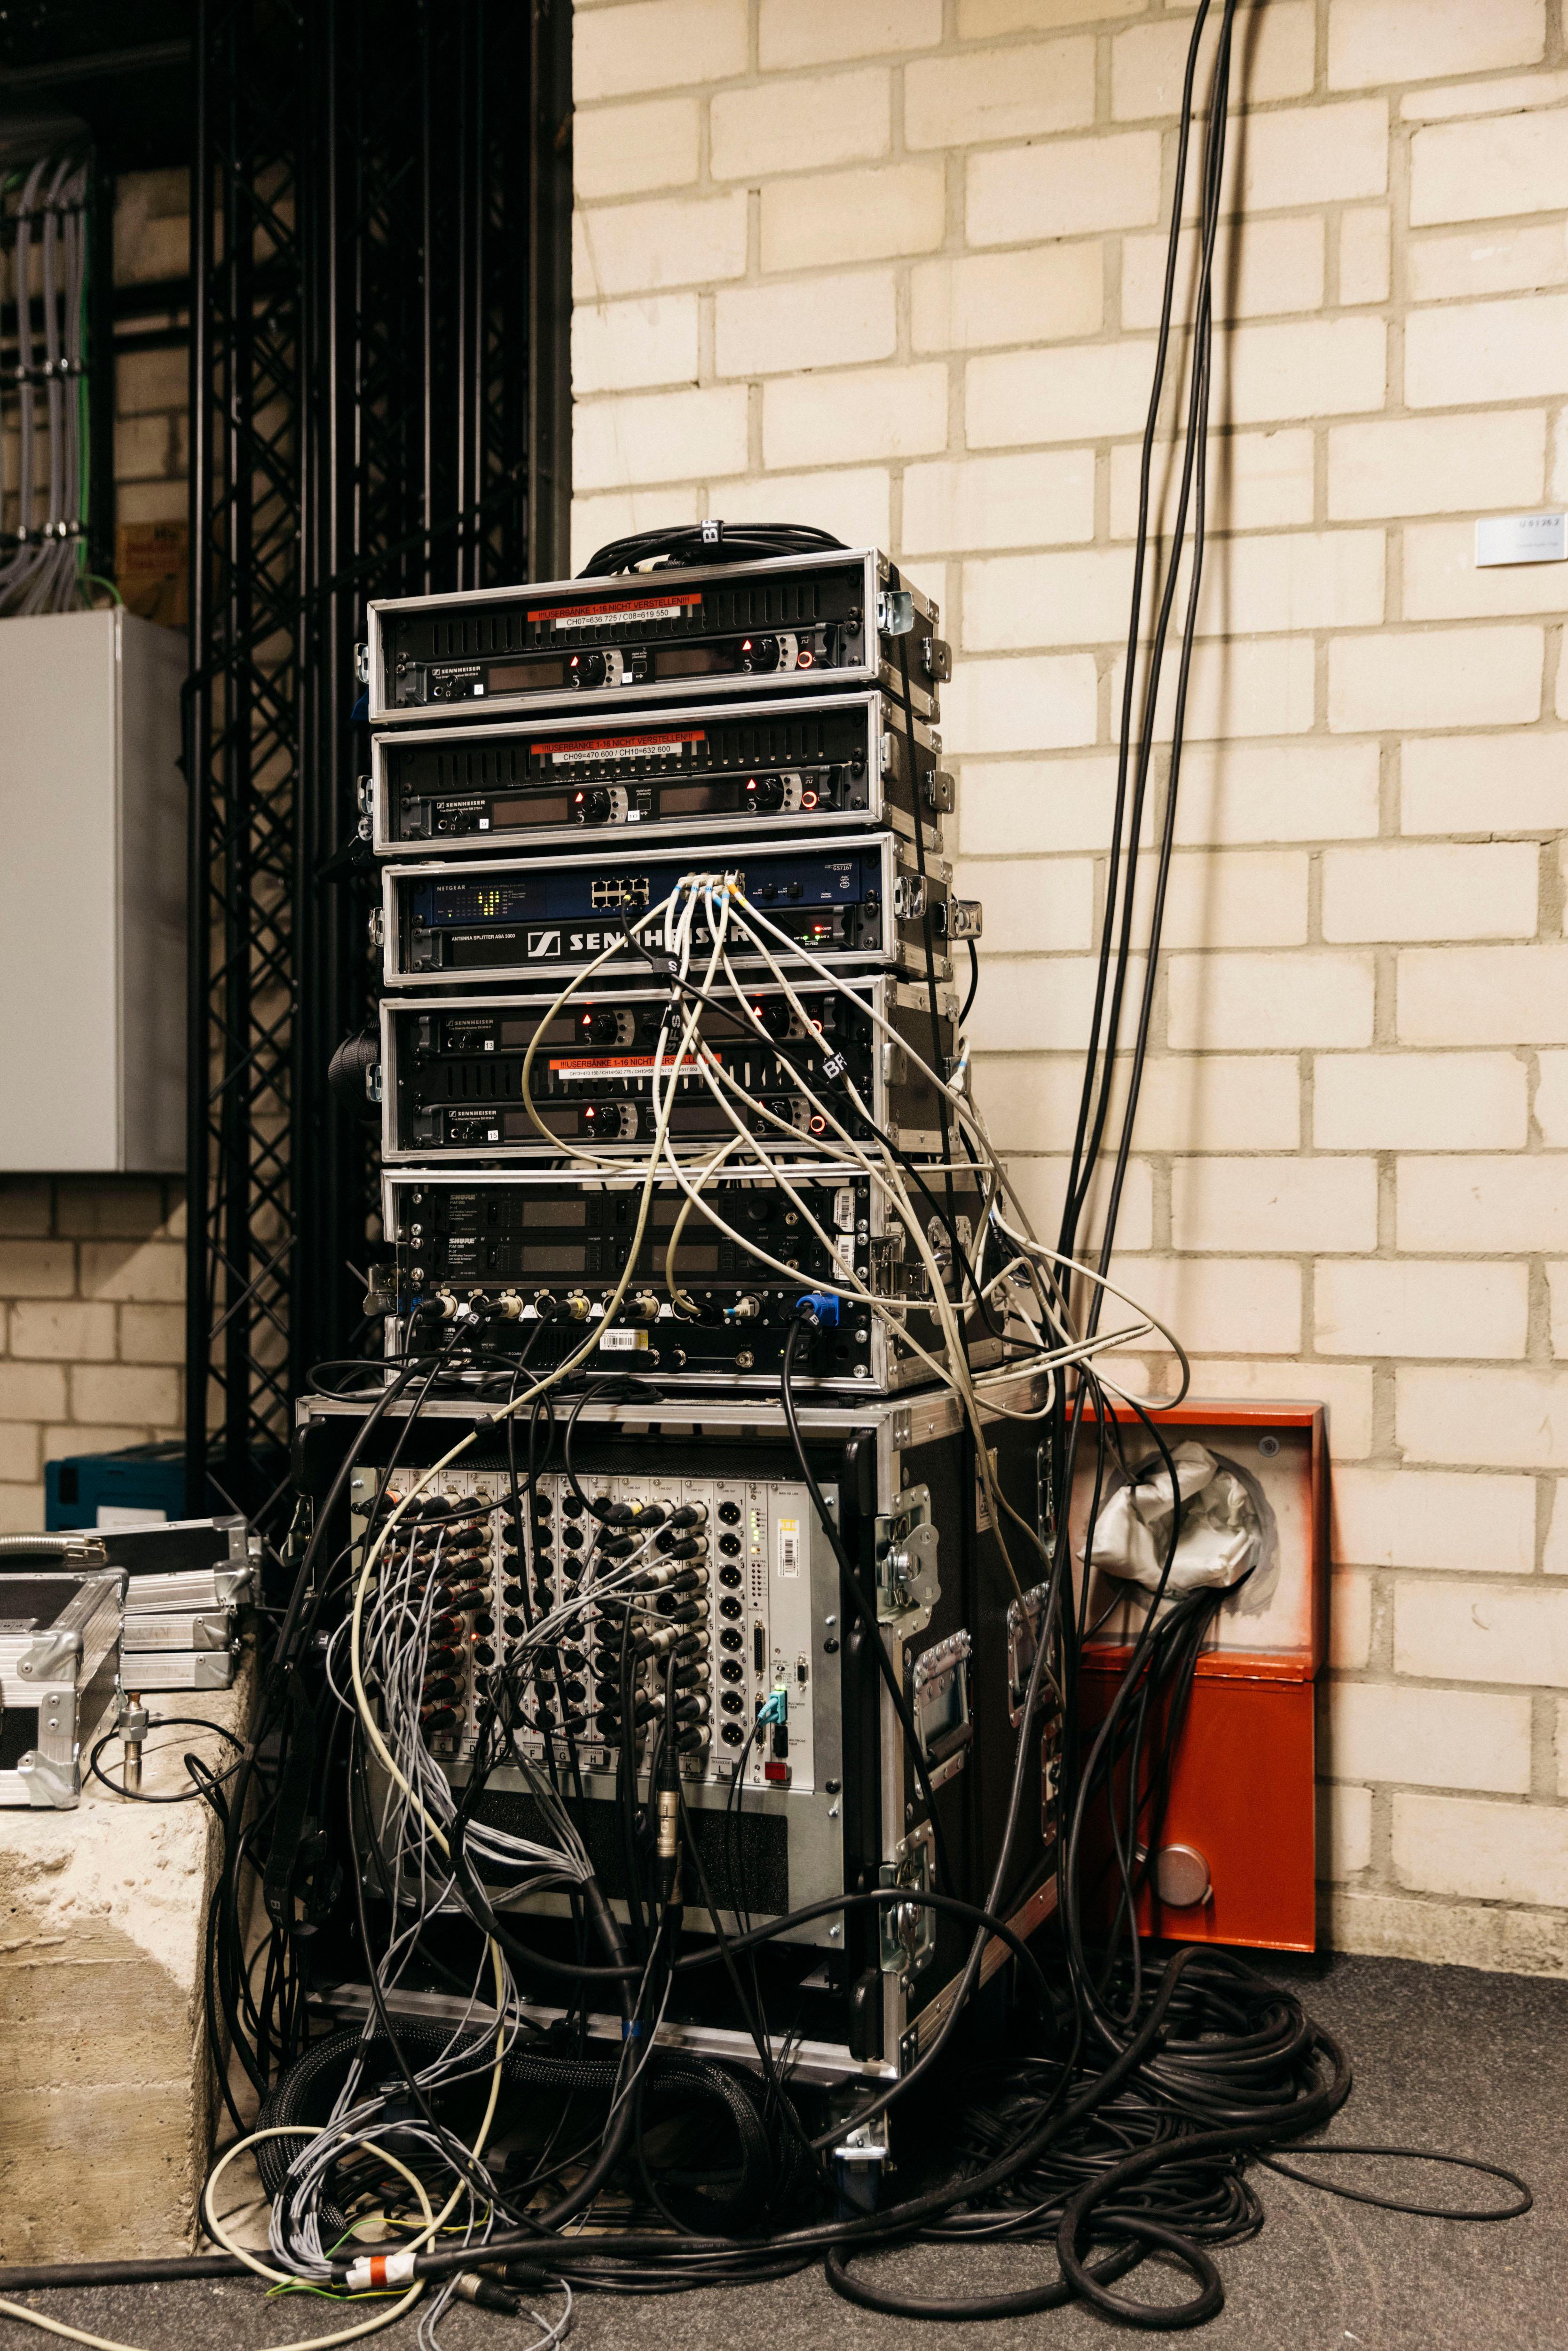 A server in front of a brick wall. There are several cables running from the wall to the server.